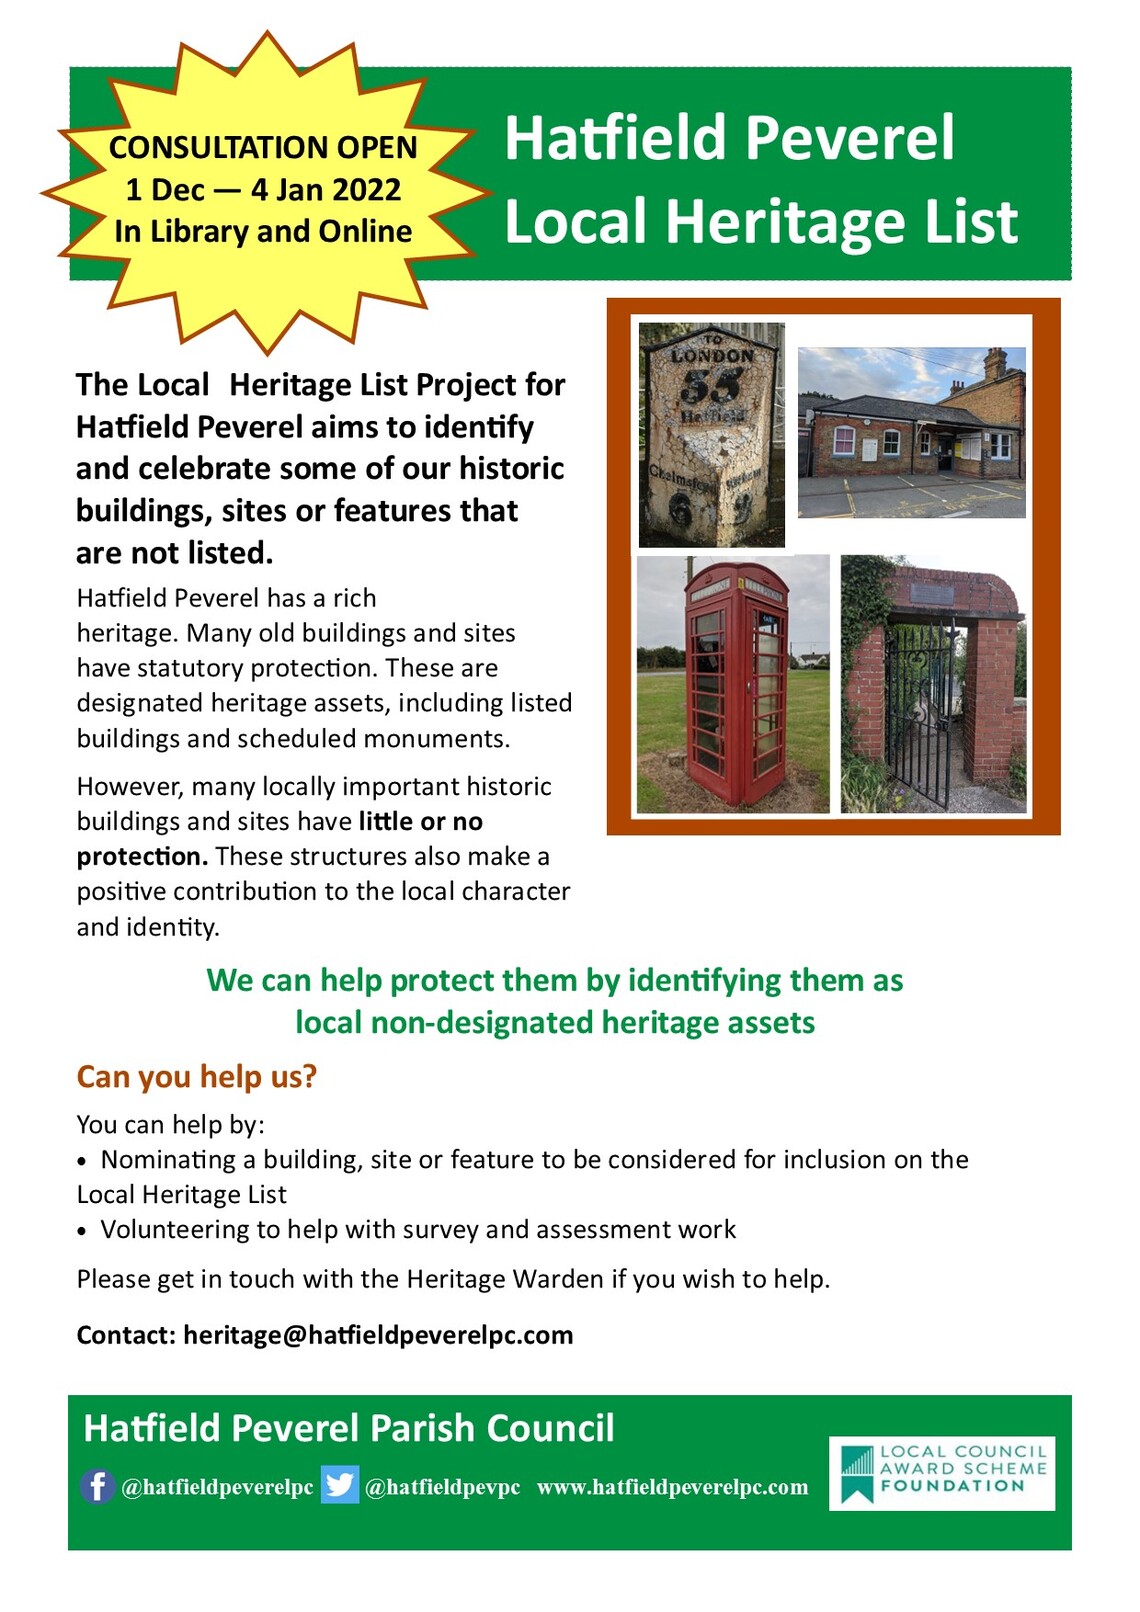 Hatfield Peverel Local Heritage List.  Consultation is open 1st December to 4th January online and in the Library